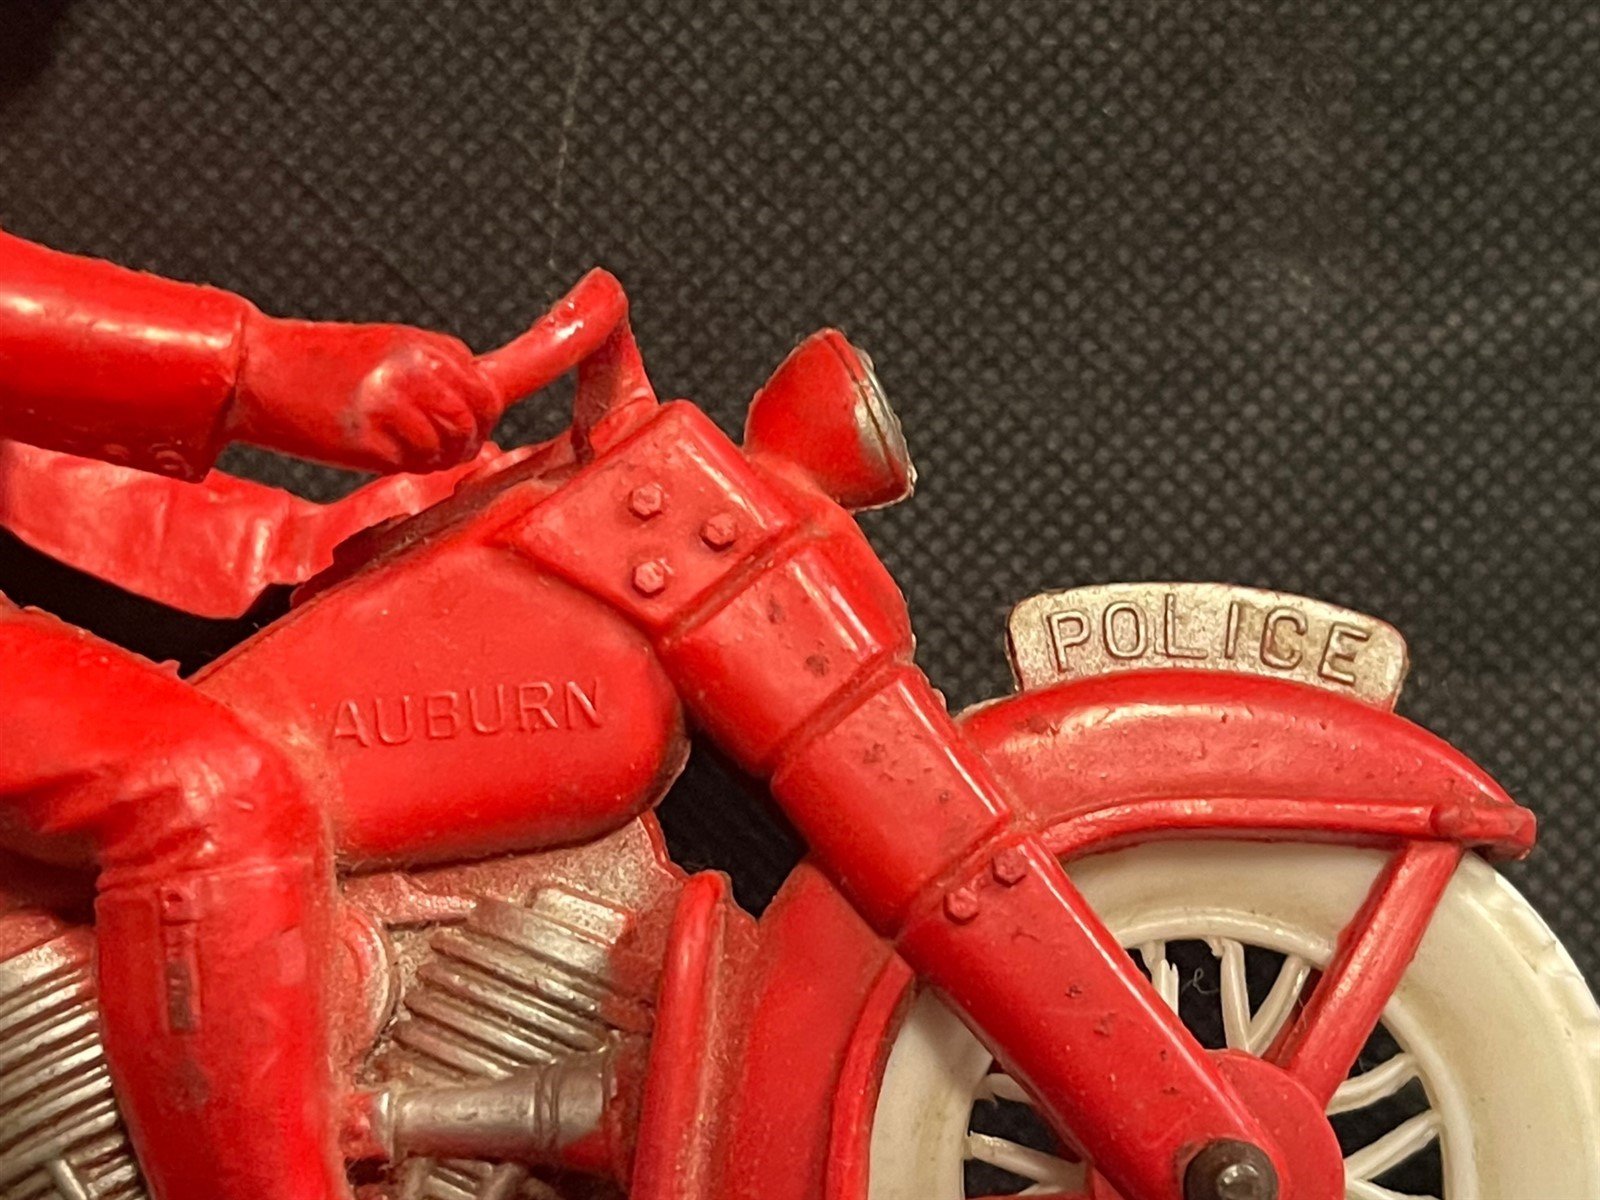 Vintage 1950's Rubber Auburn Police Motorcycle Policeman Toys Red and Blue